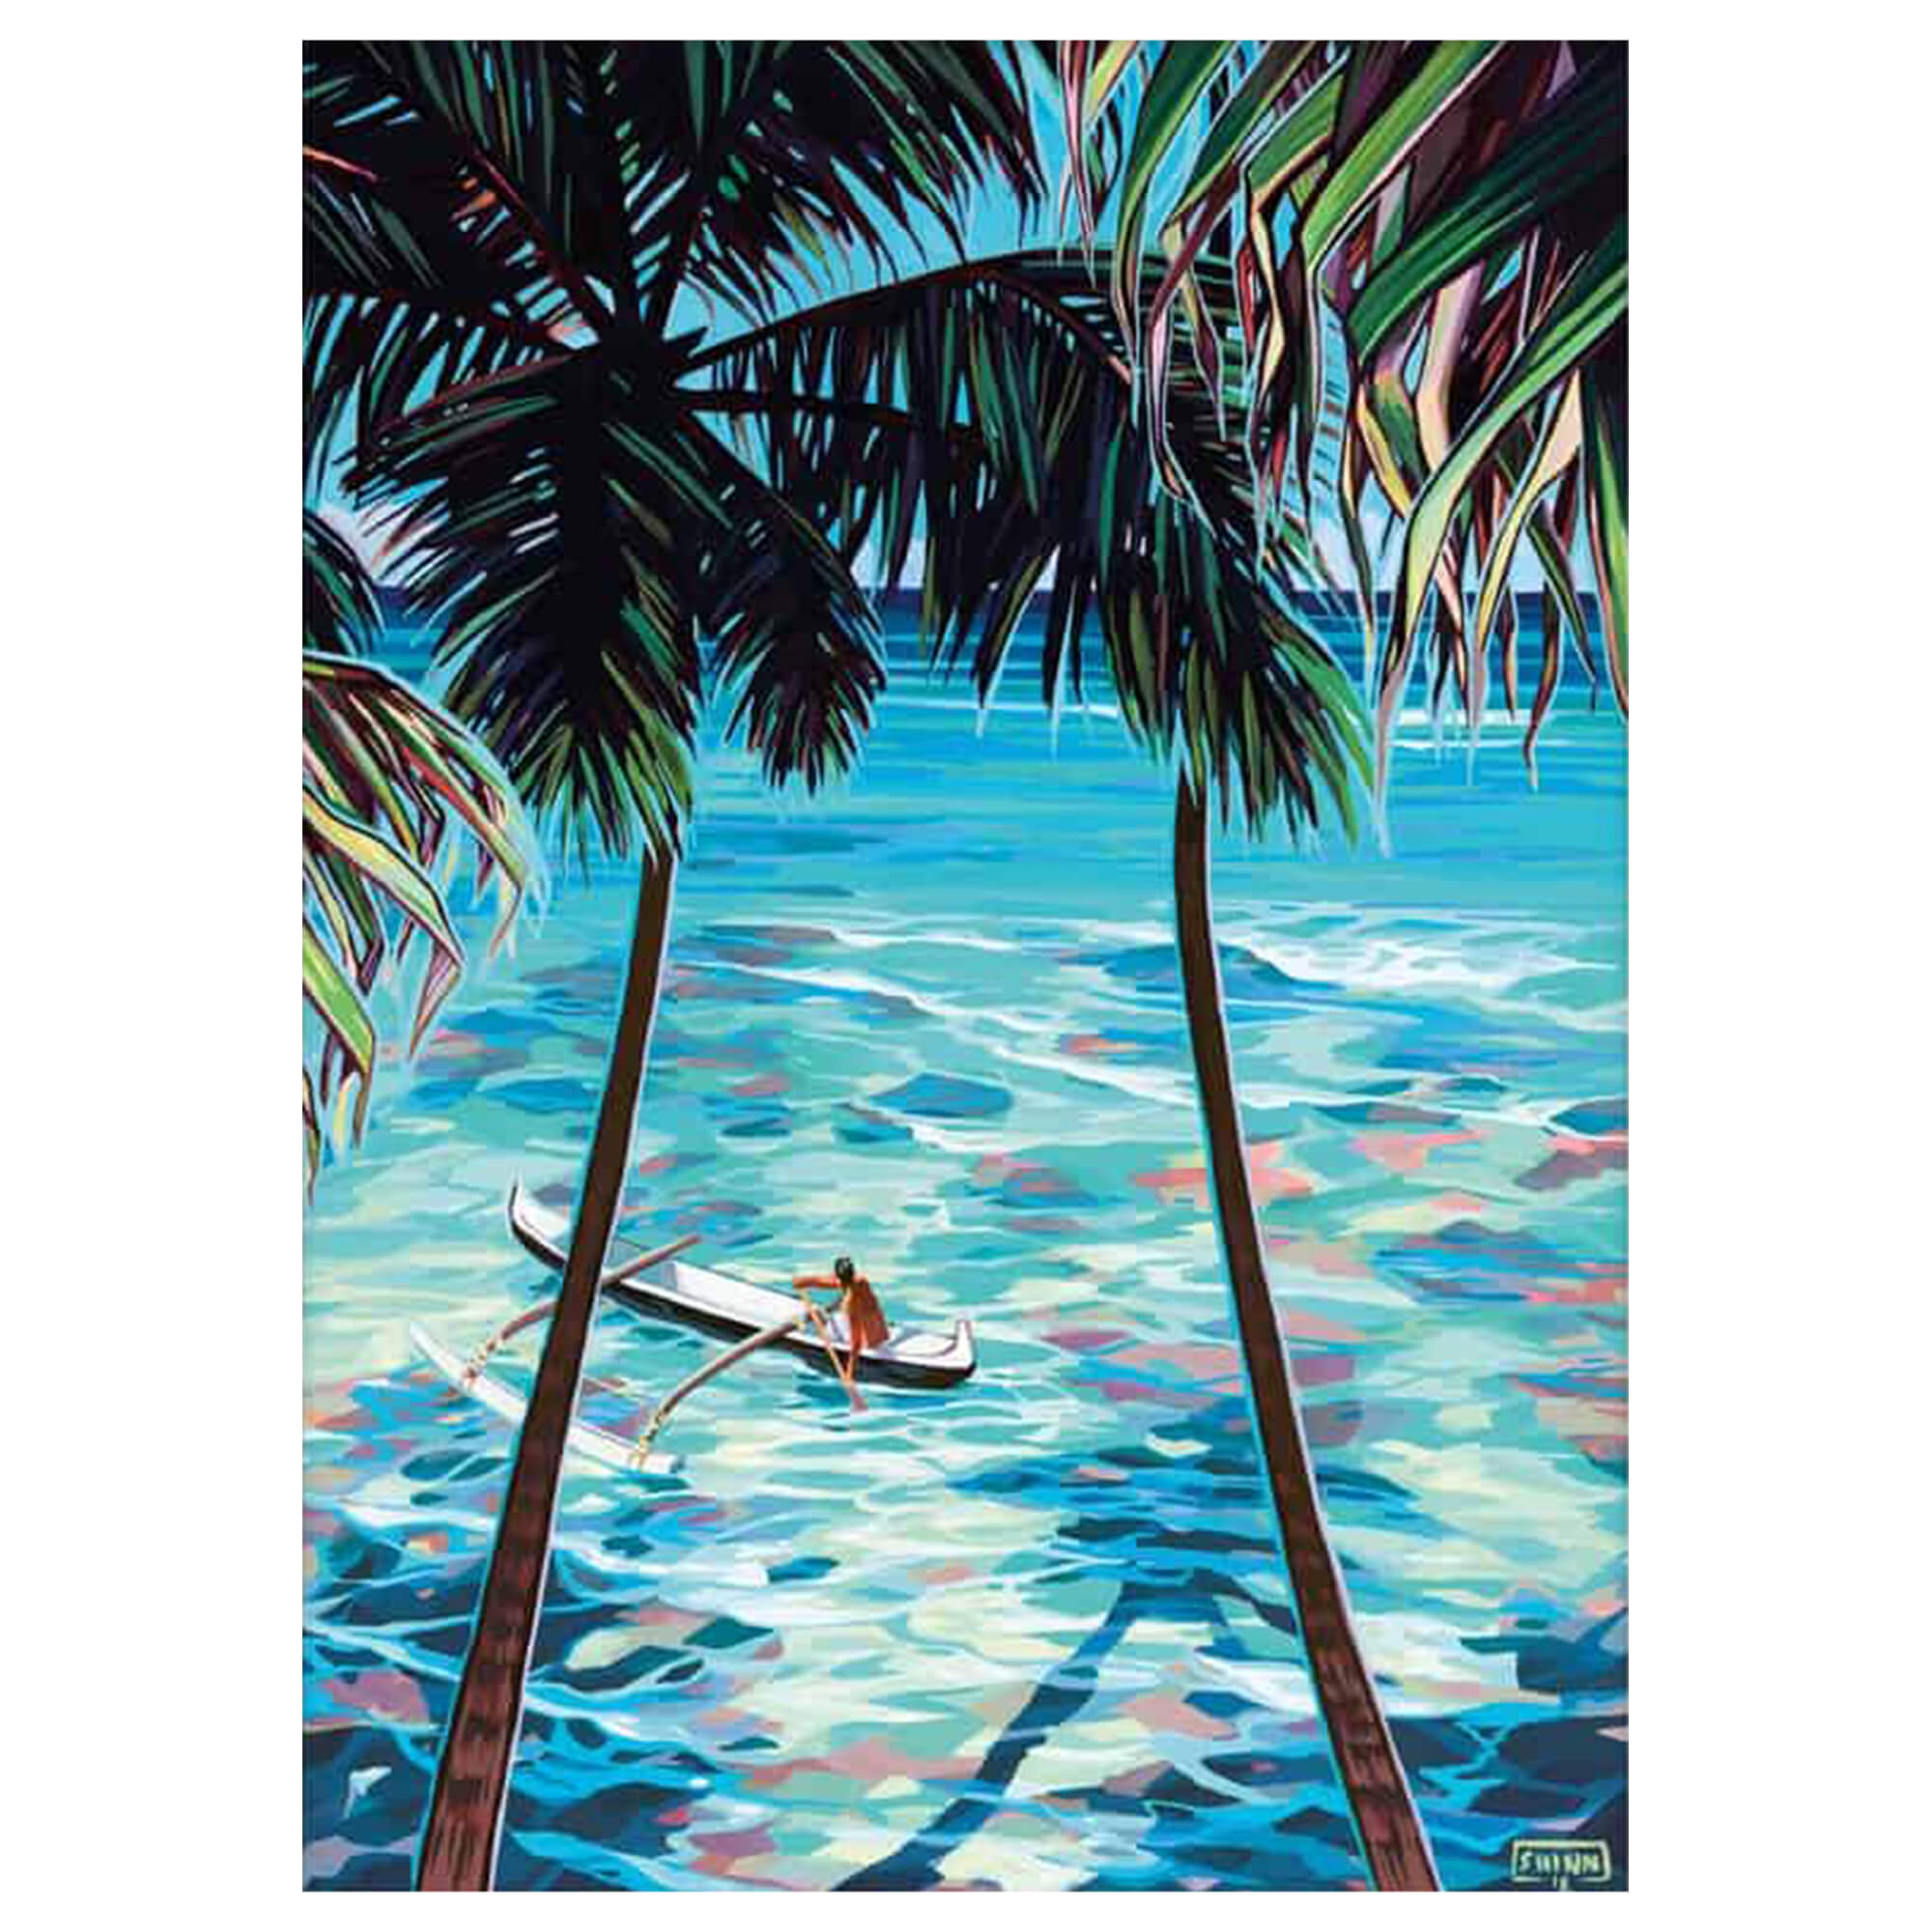 Matted art print of a paddler in an outrigger canoe amongst the blues of the ocean and a palm tree oasis by Hawaii artist Christie Shinn